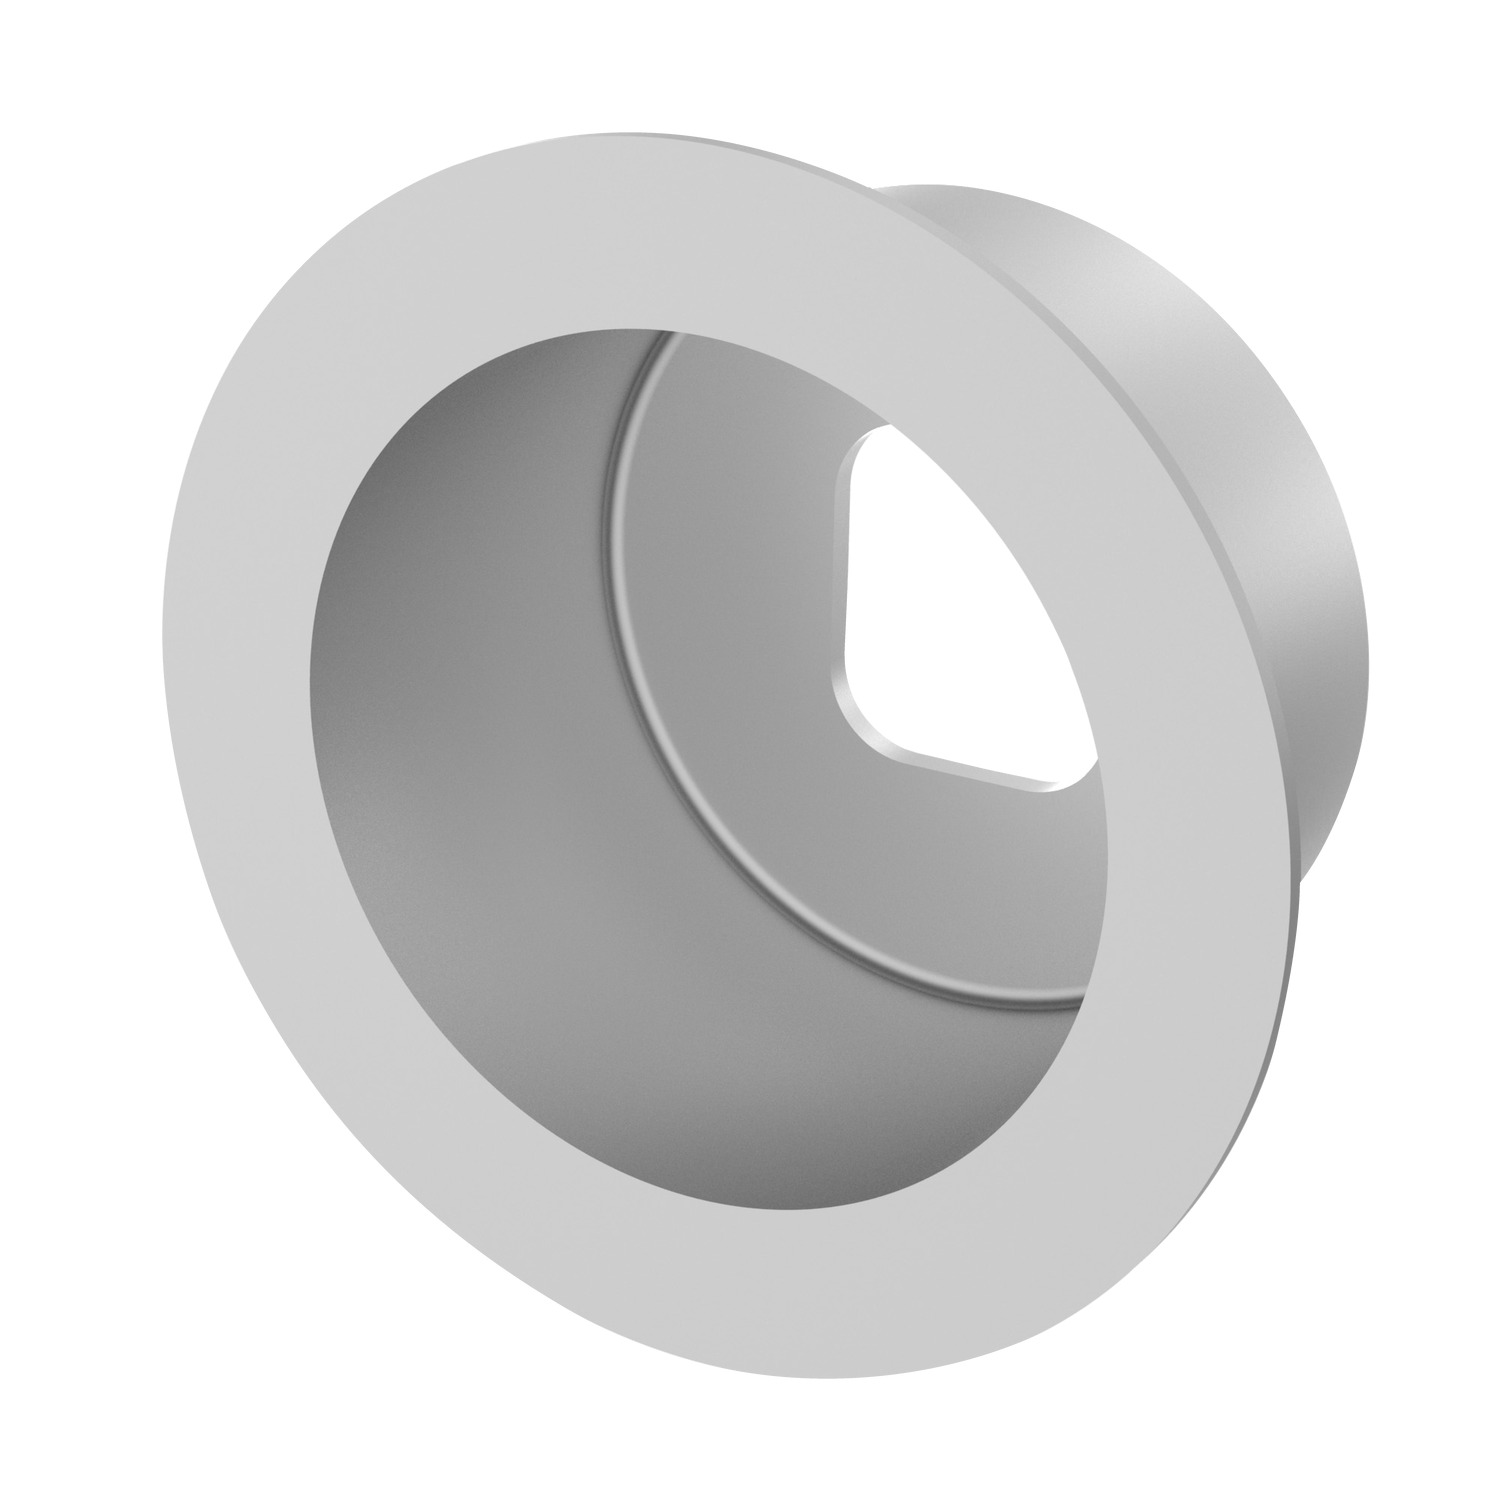 A0420 - Recessed Spacer - for Isolation Panels and Covers